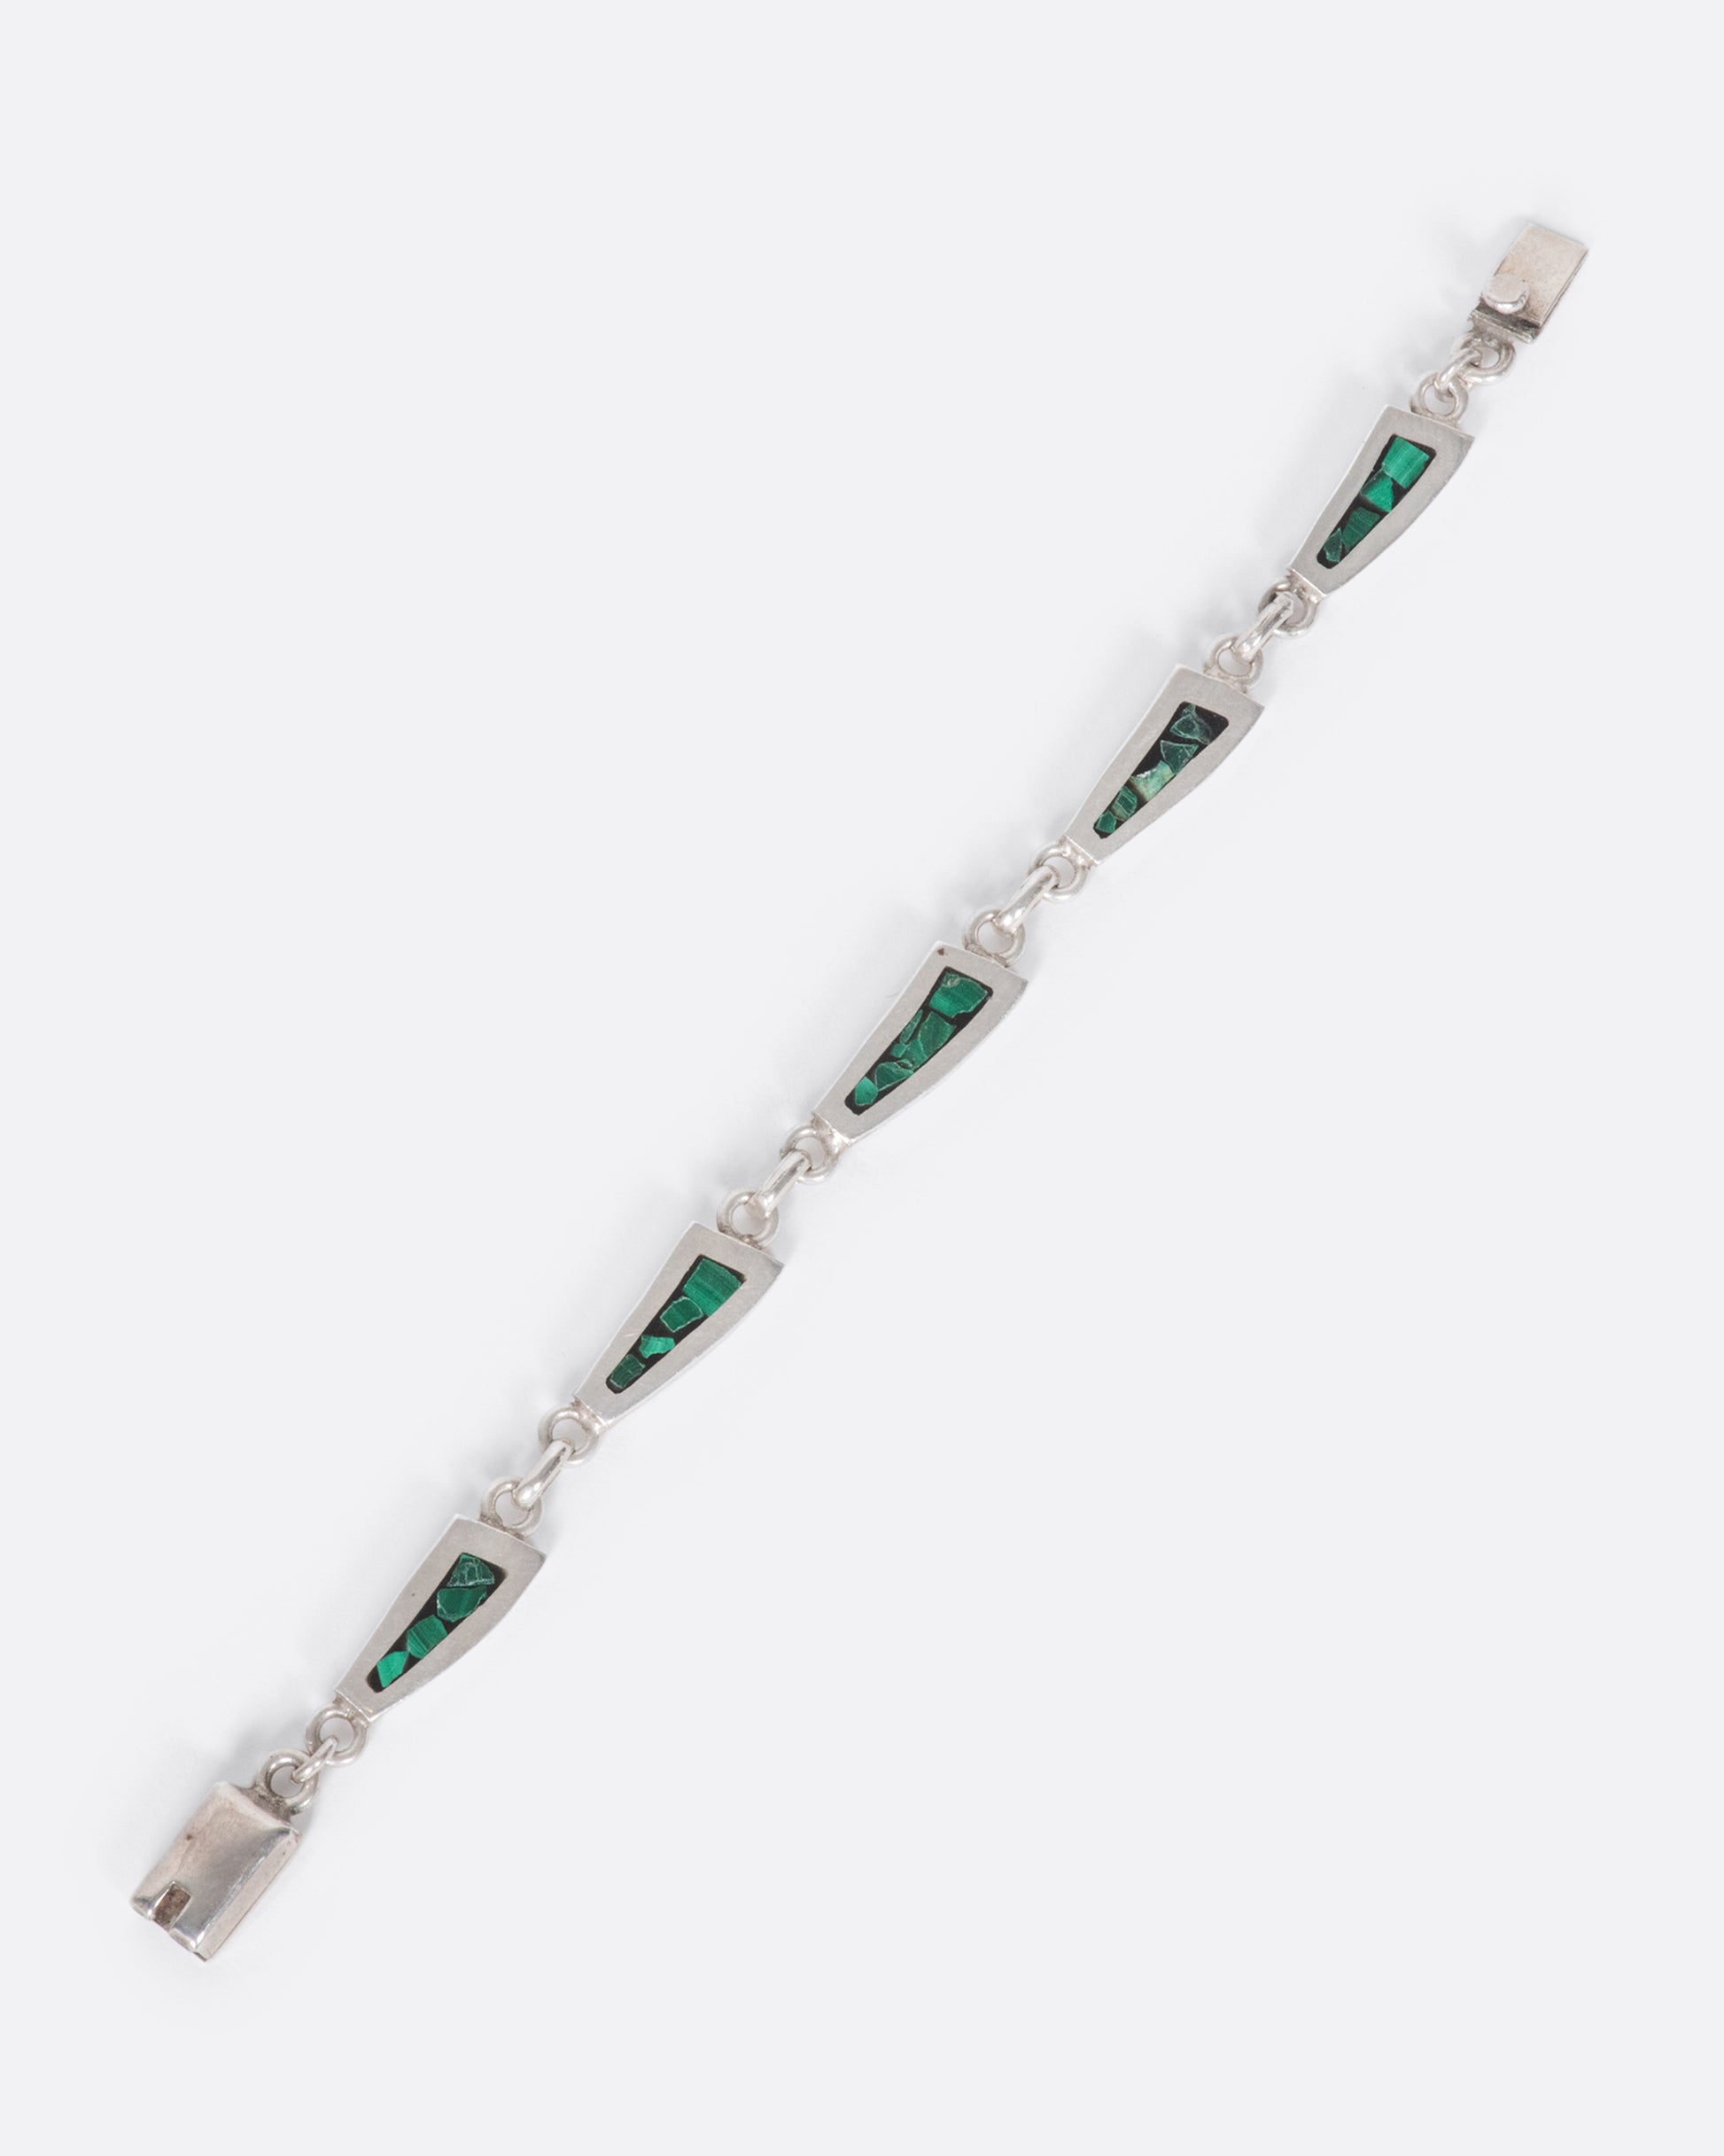 A sterling silver chain bracelet with long, trapezoidal links, lined with malachite inlay.